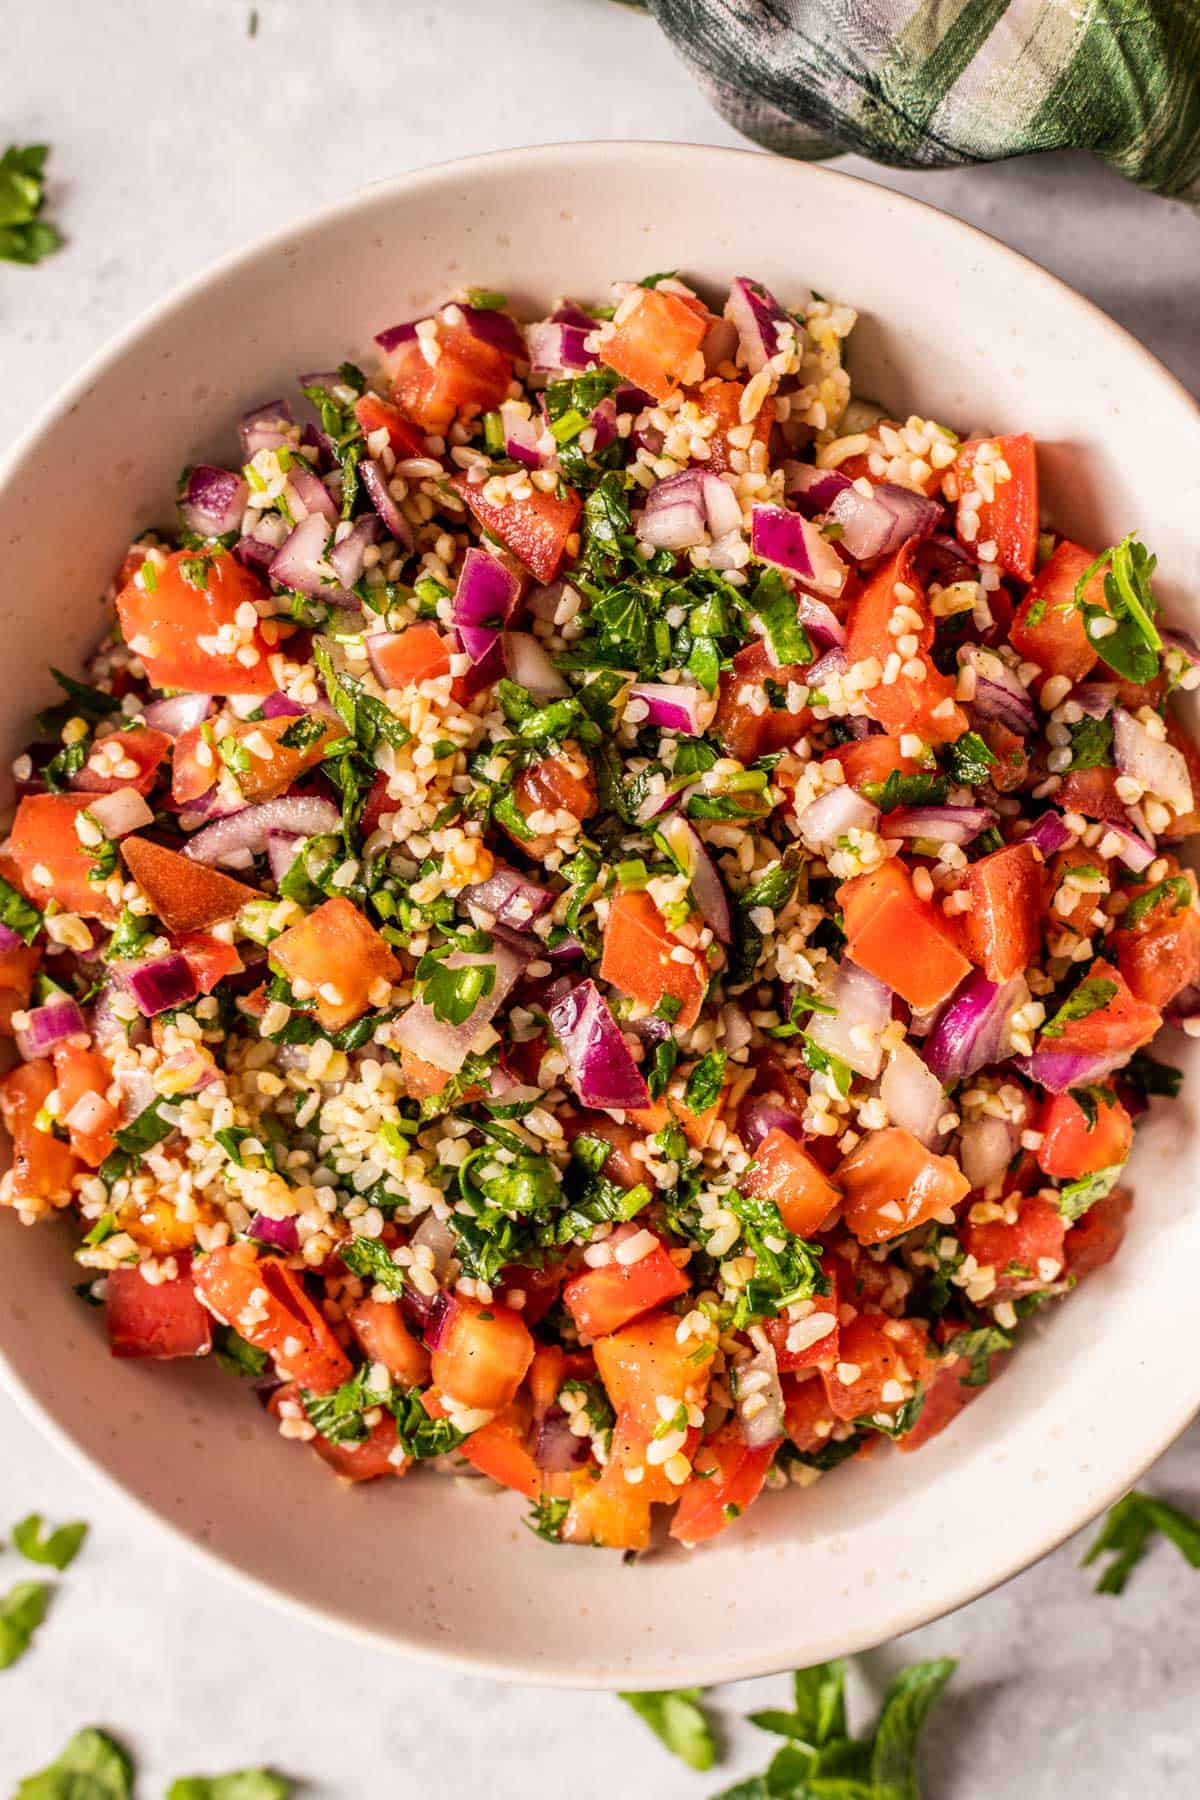 Authentic Lebanese tabouli salad in a white bowl.